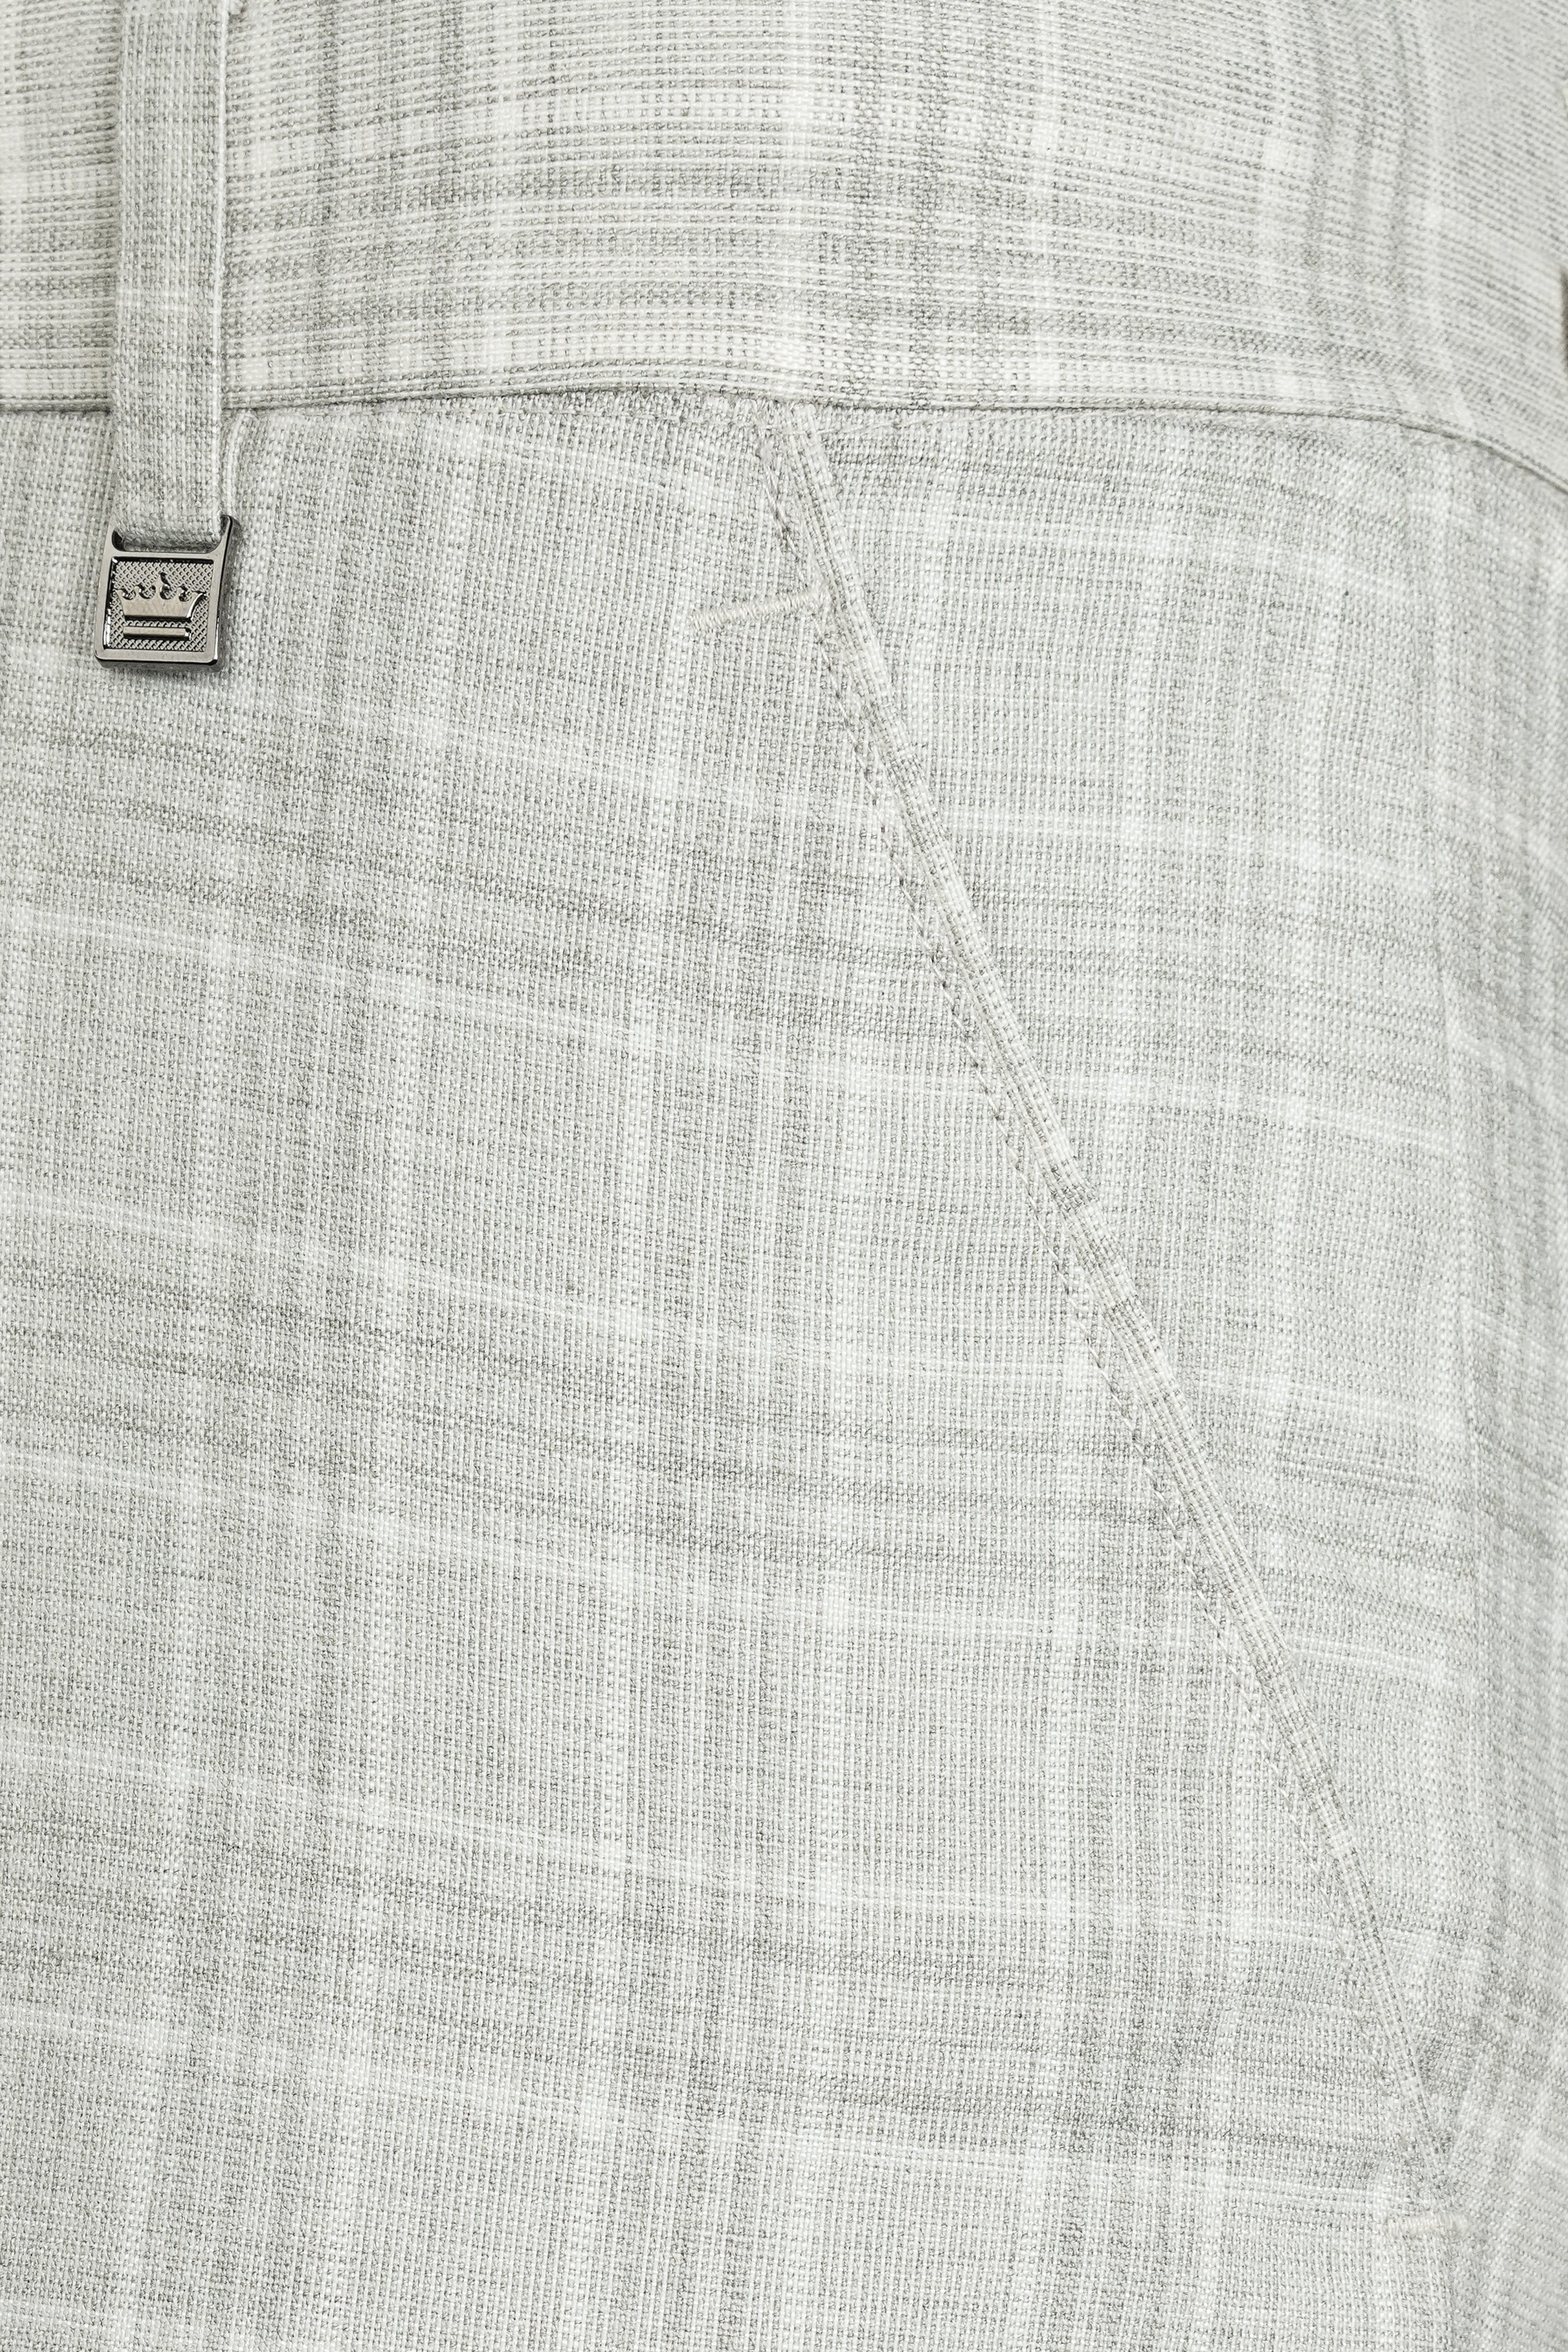 Cloud Gray Plaid Wool Rich Double Breasted Suit ST3109-DB-36, ST3109-DB-38, ST3109-DB-40, ST3109-DB-42, ST3109-DB-44, ST3109-DB-46, ST3109-DB-48, ST3109-DB-50, ST3109-DB-52, ST3109-DB-54, ST3109-DB-56, ST3109-DB-58, ST3109-DB-60